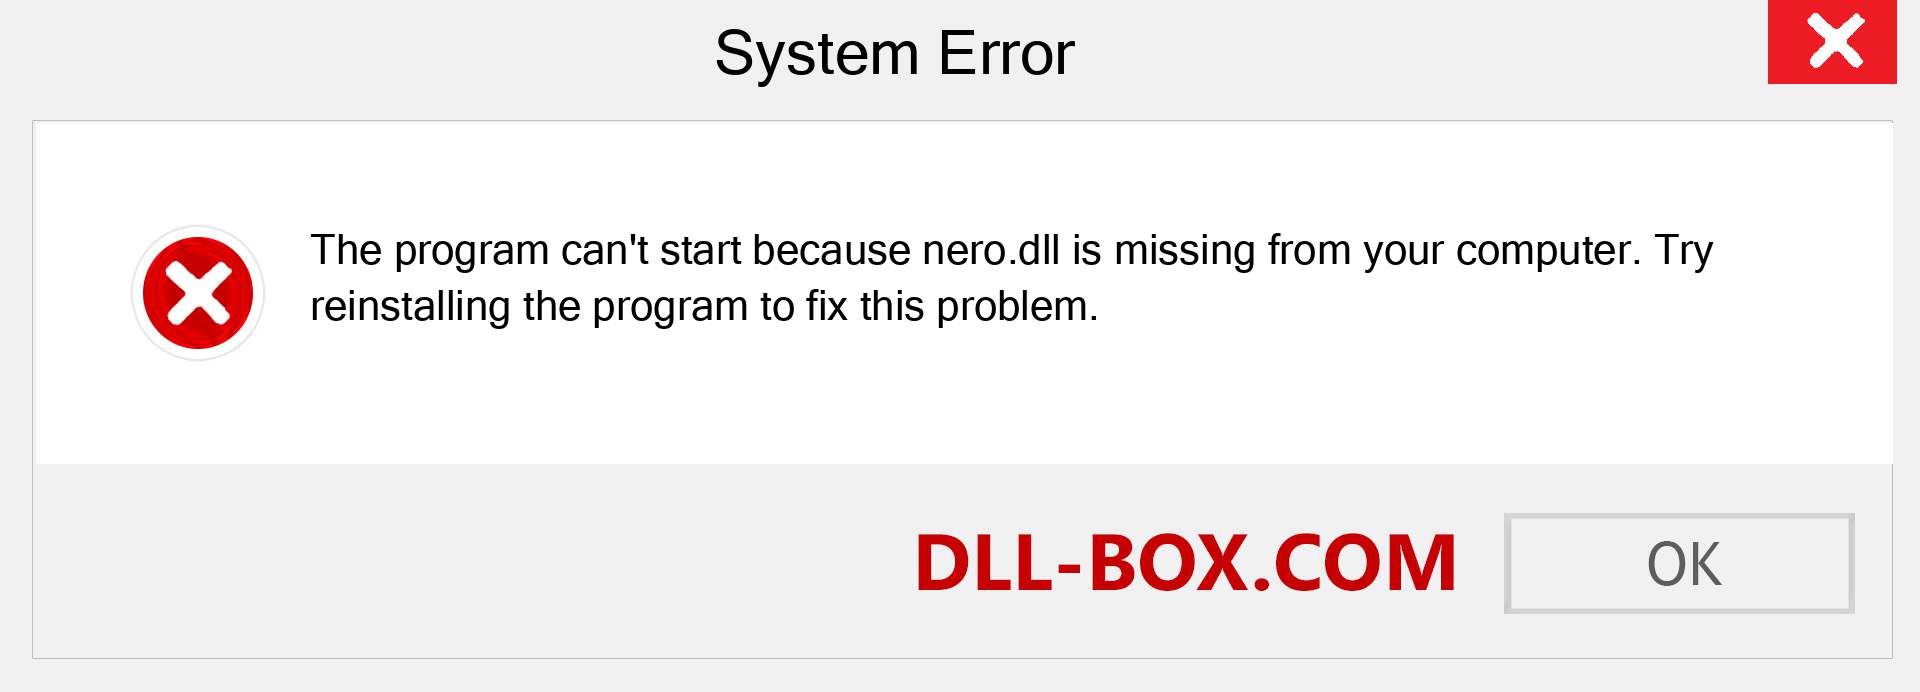  nero.dll file is missing?. Download for Windows 7, 8, 10 - Fix  nero dll Missing Error on Windows, photos, images